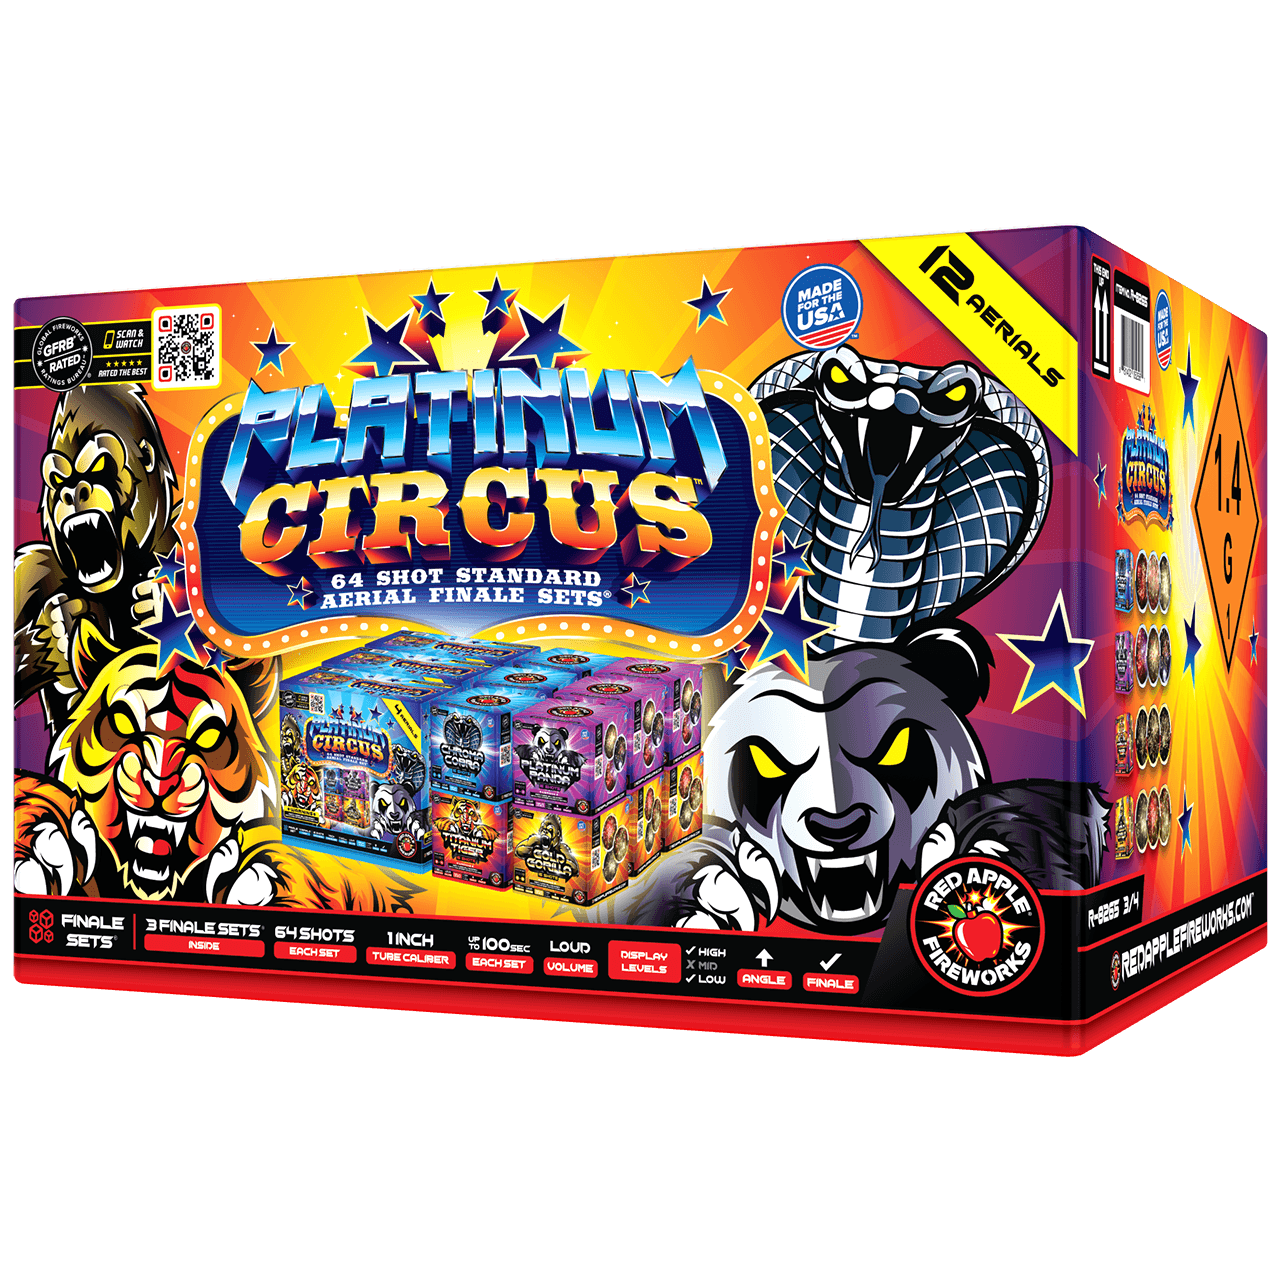 Exciting Platinum Circus 64 Shots Fireworks Set – Red Apple® Fireworks